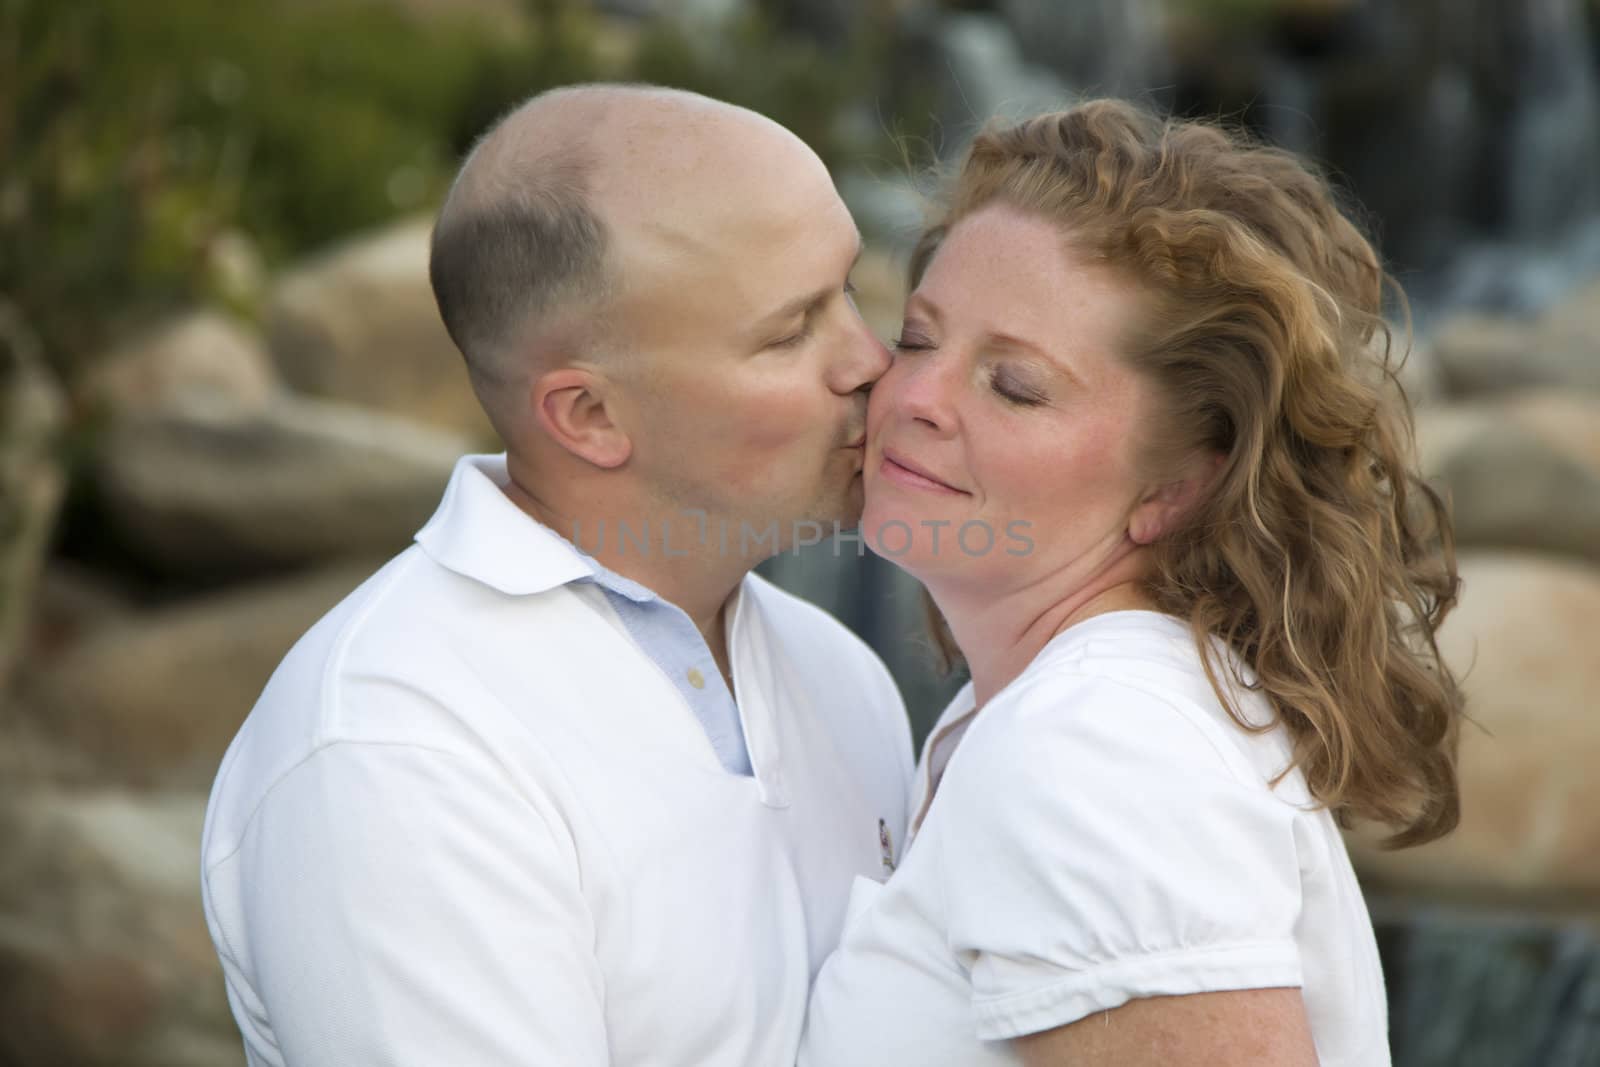 Happy, Attractive, Affectionate Couple Kiss on Cheek in the Park.